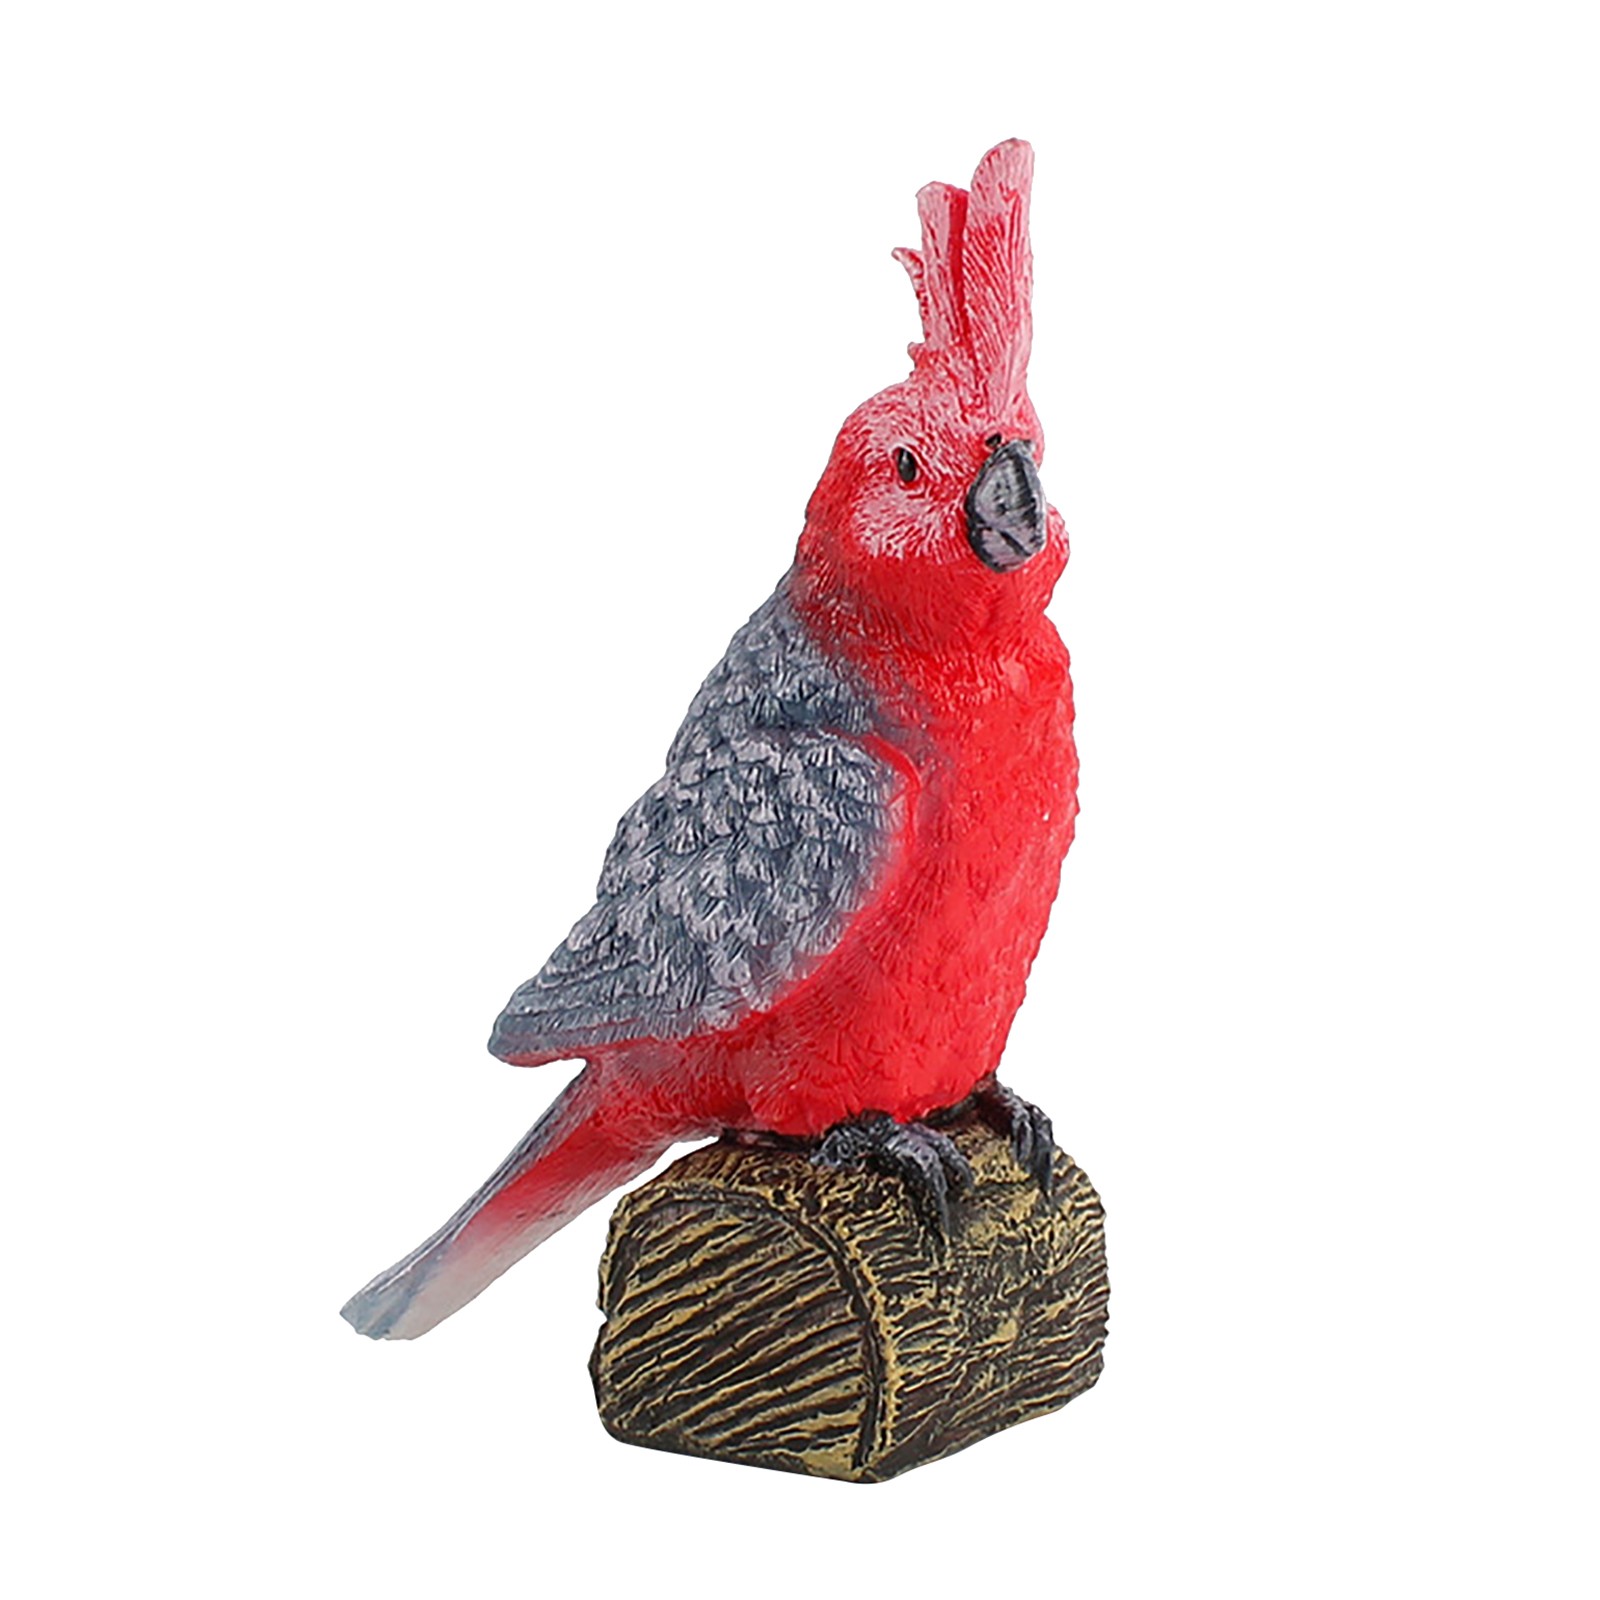 Kayannuo Static Bird Parrot Figurines for Collection & Decoration